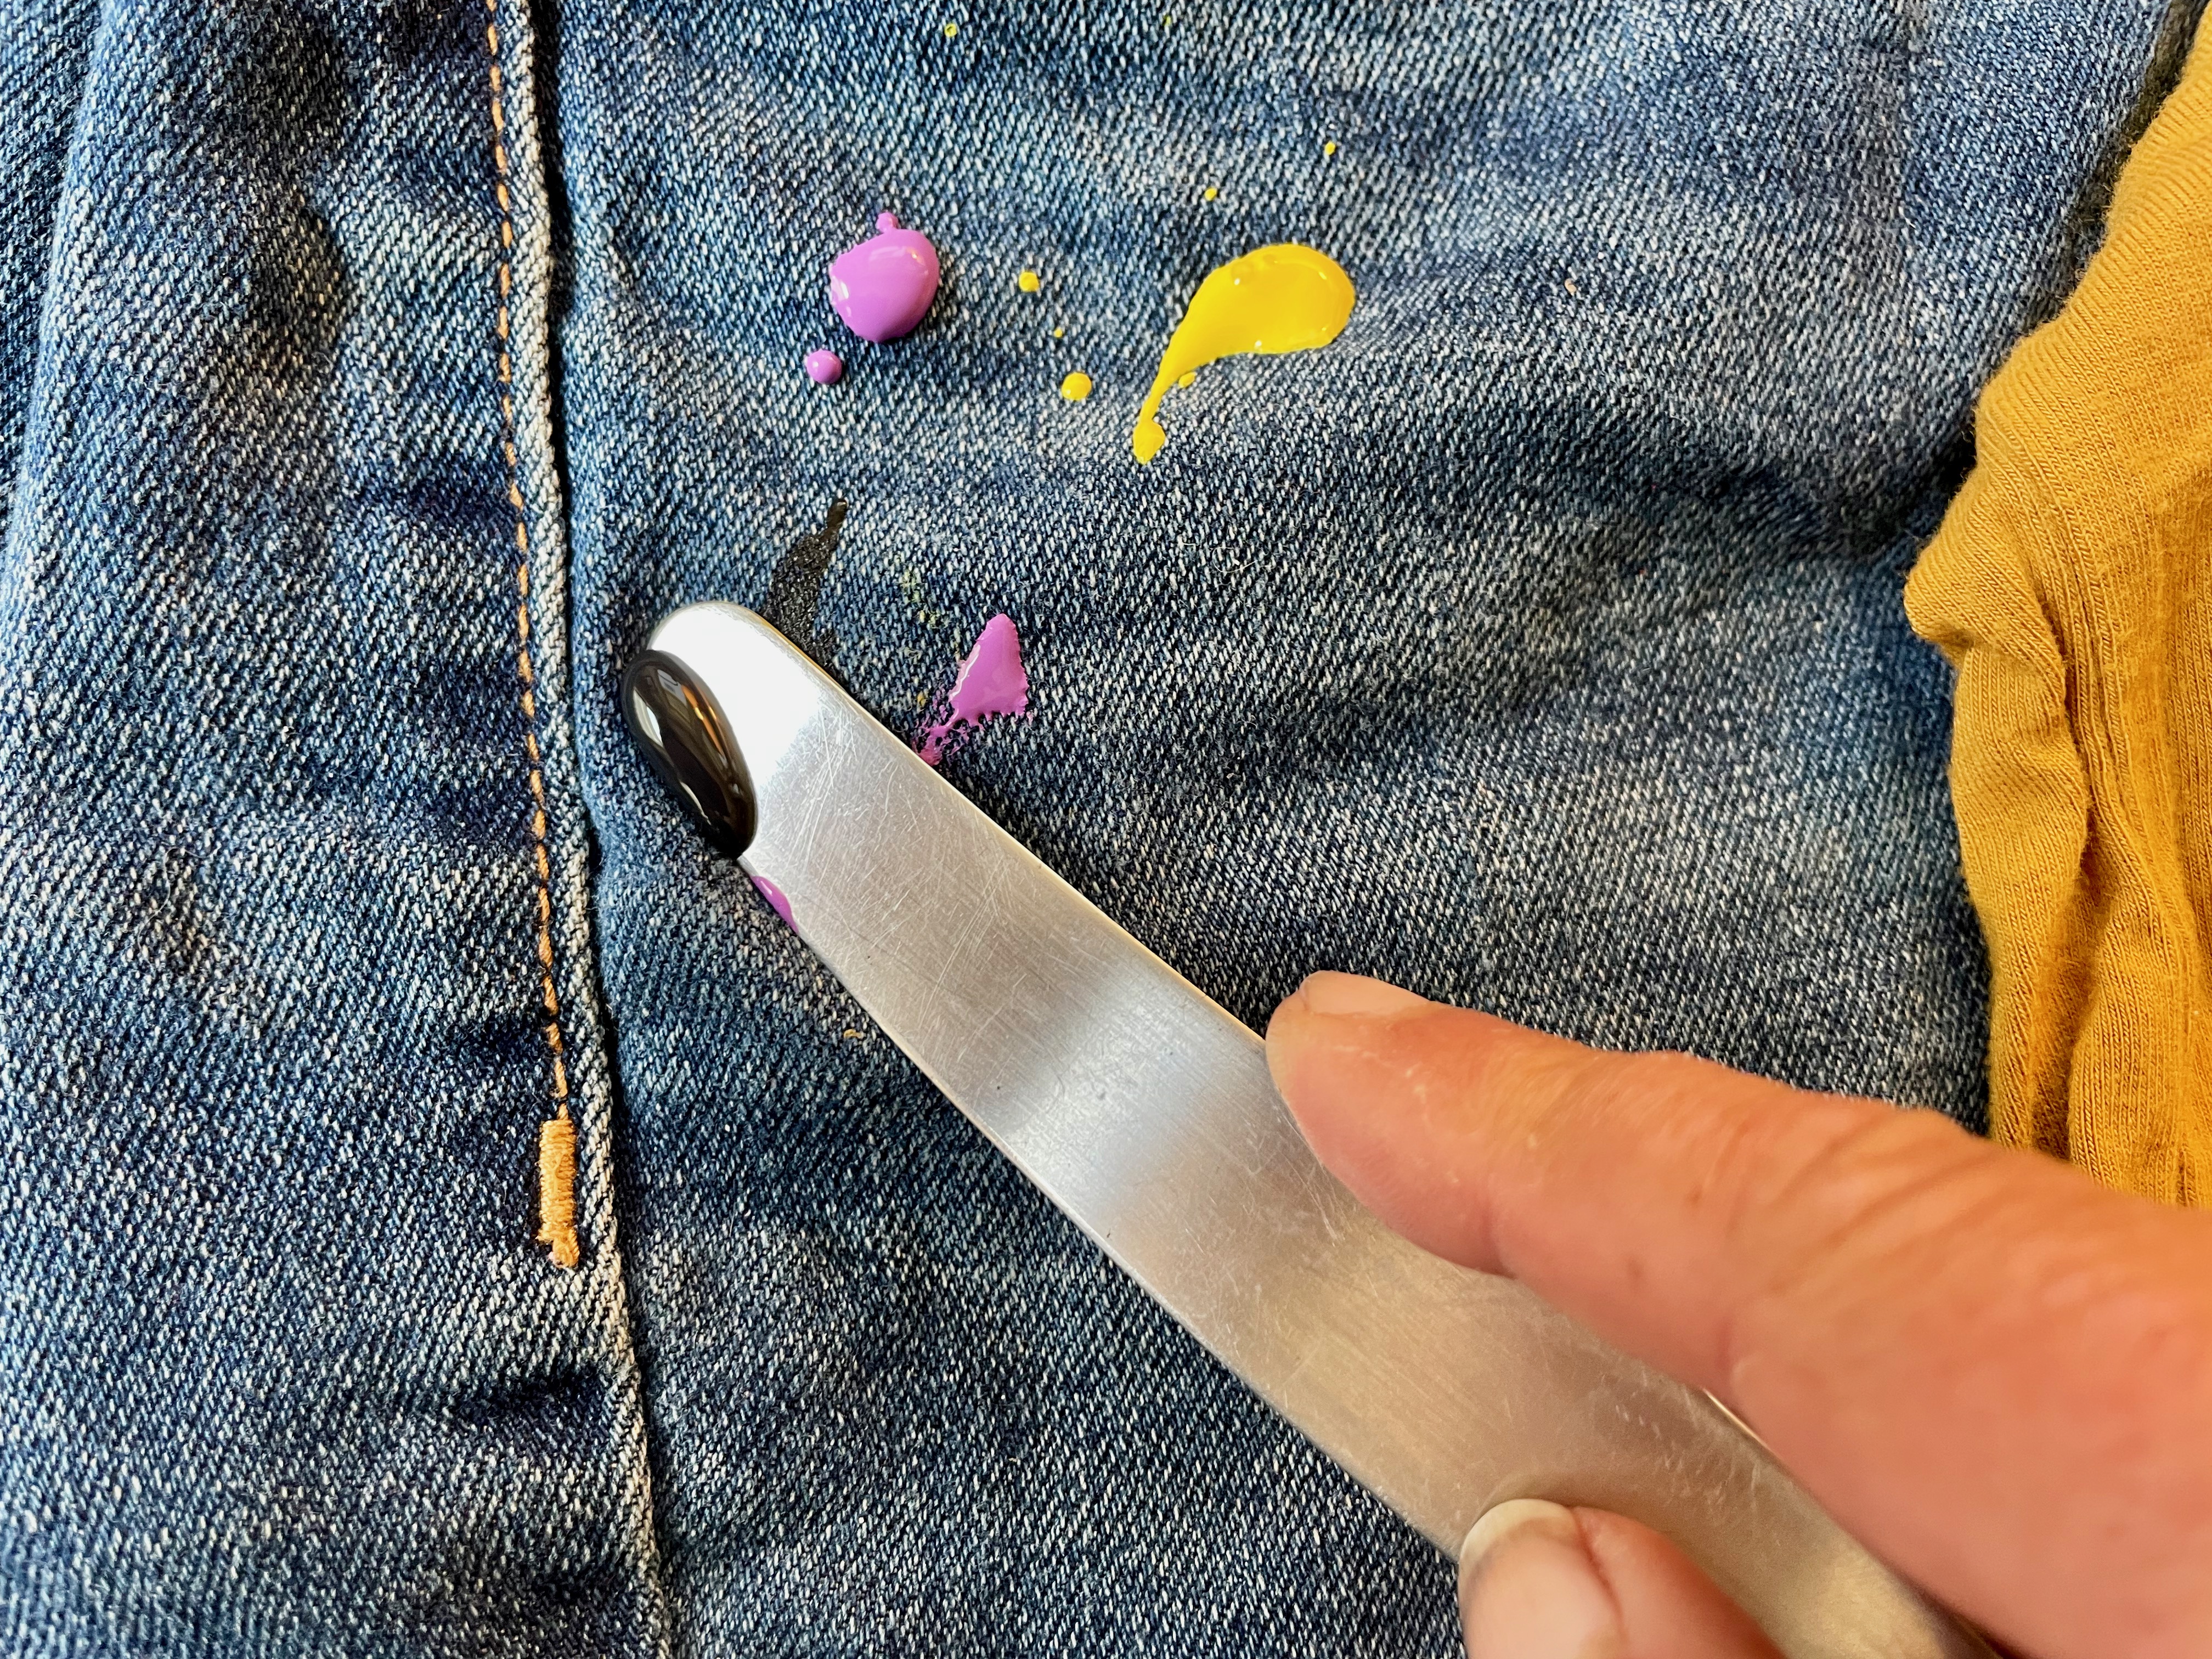 someone scraping fresh paint off of a pair of jeans